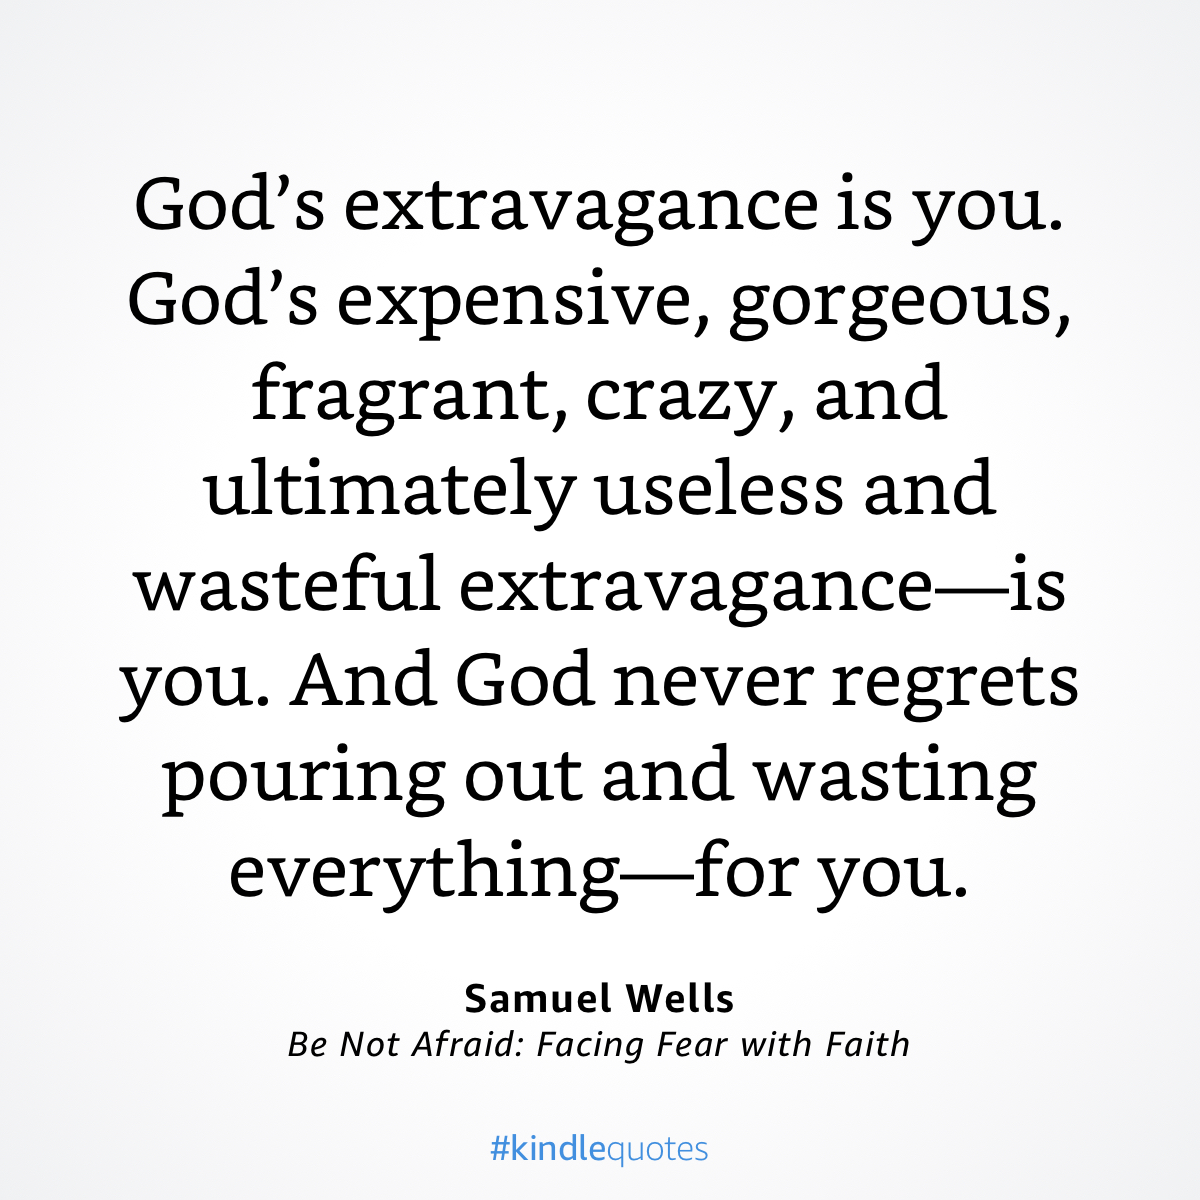 God's extravagance is you